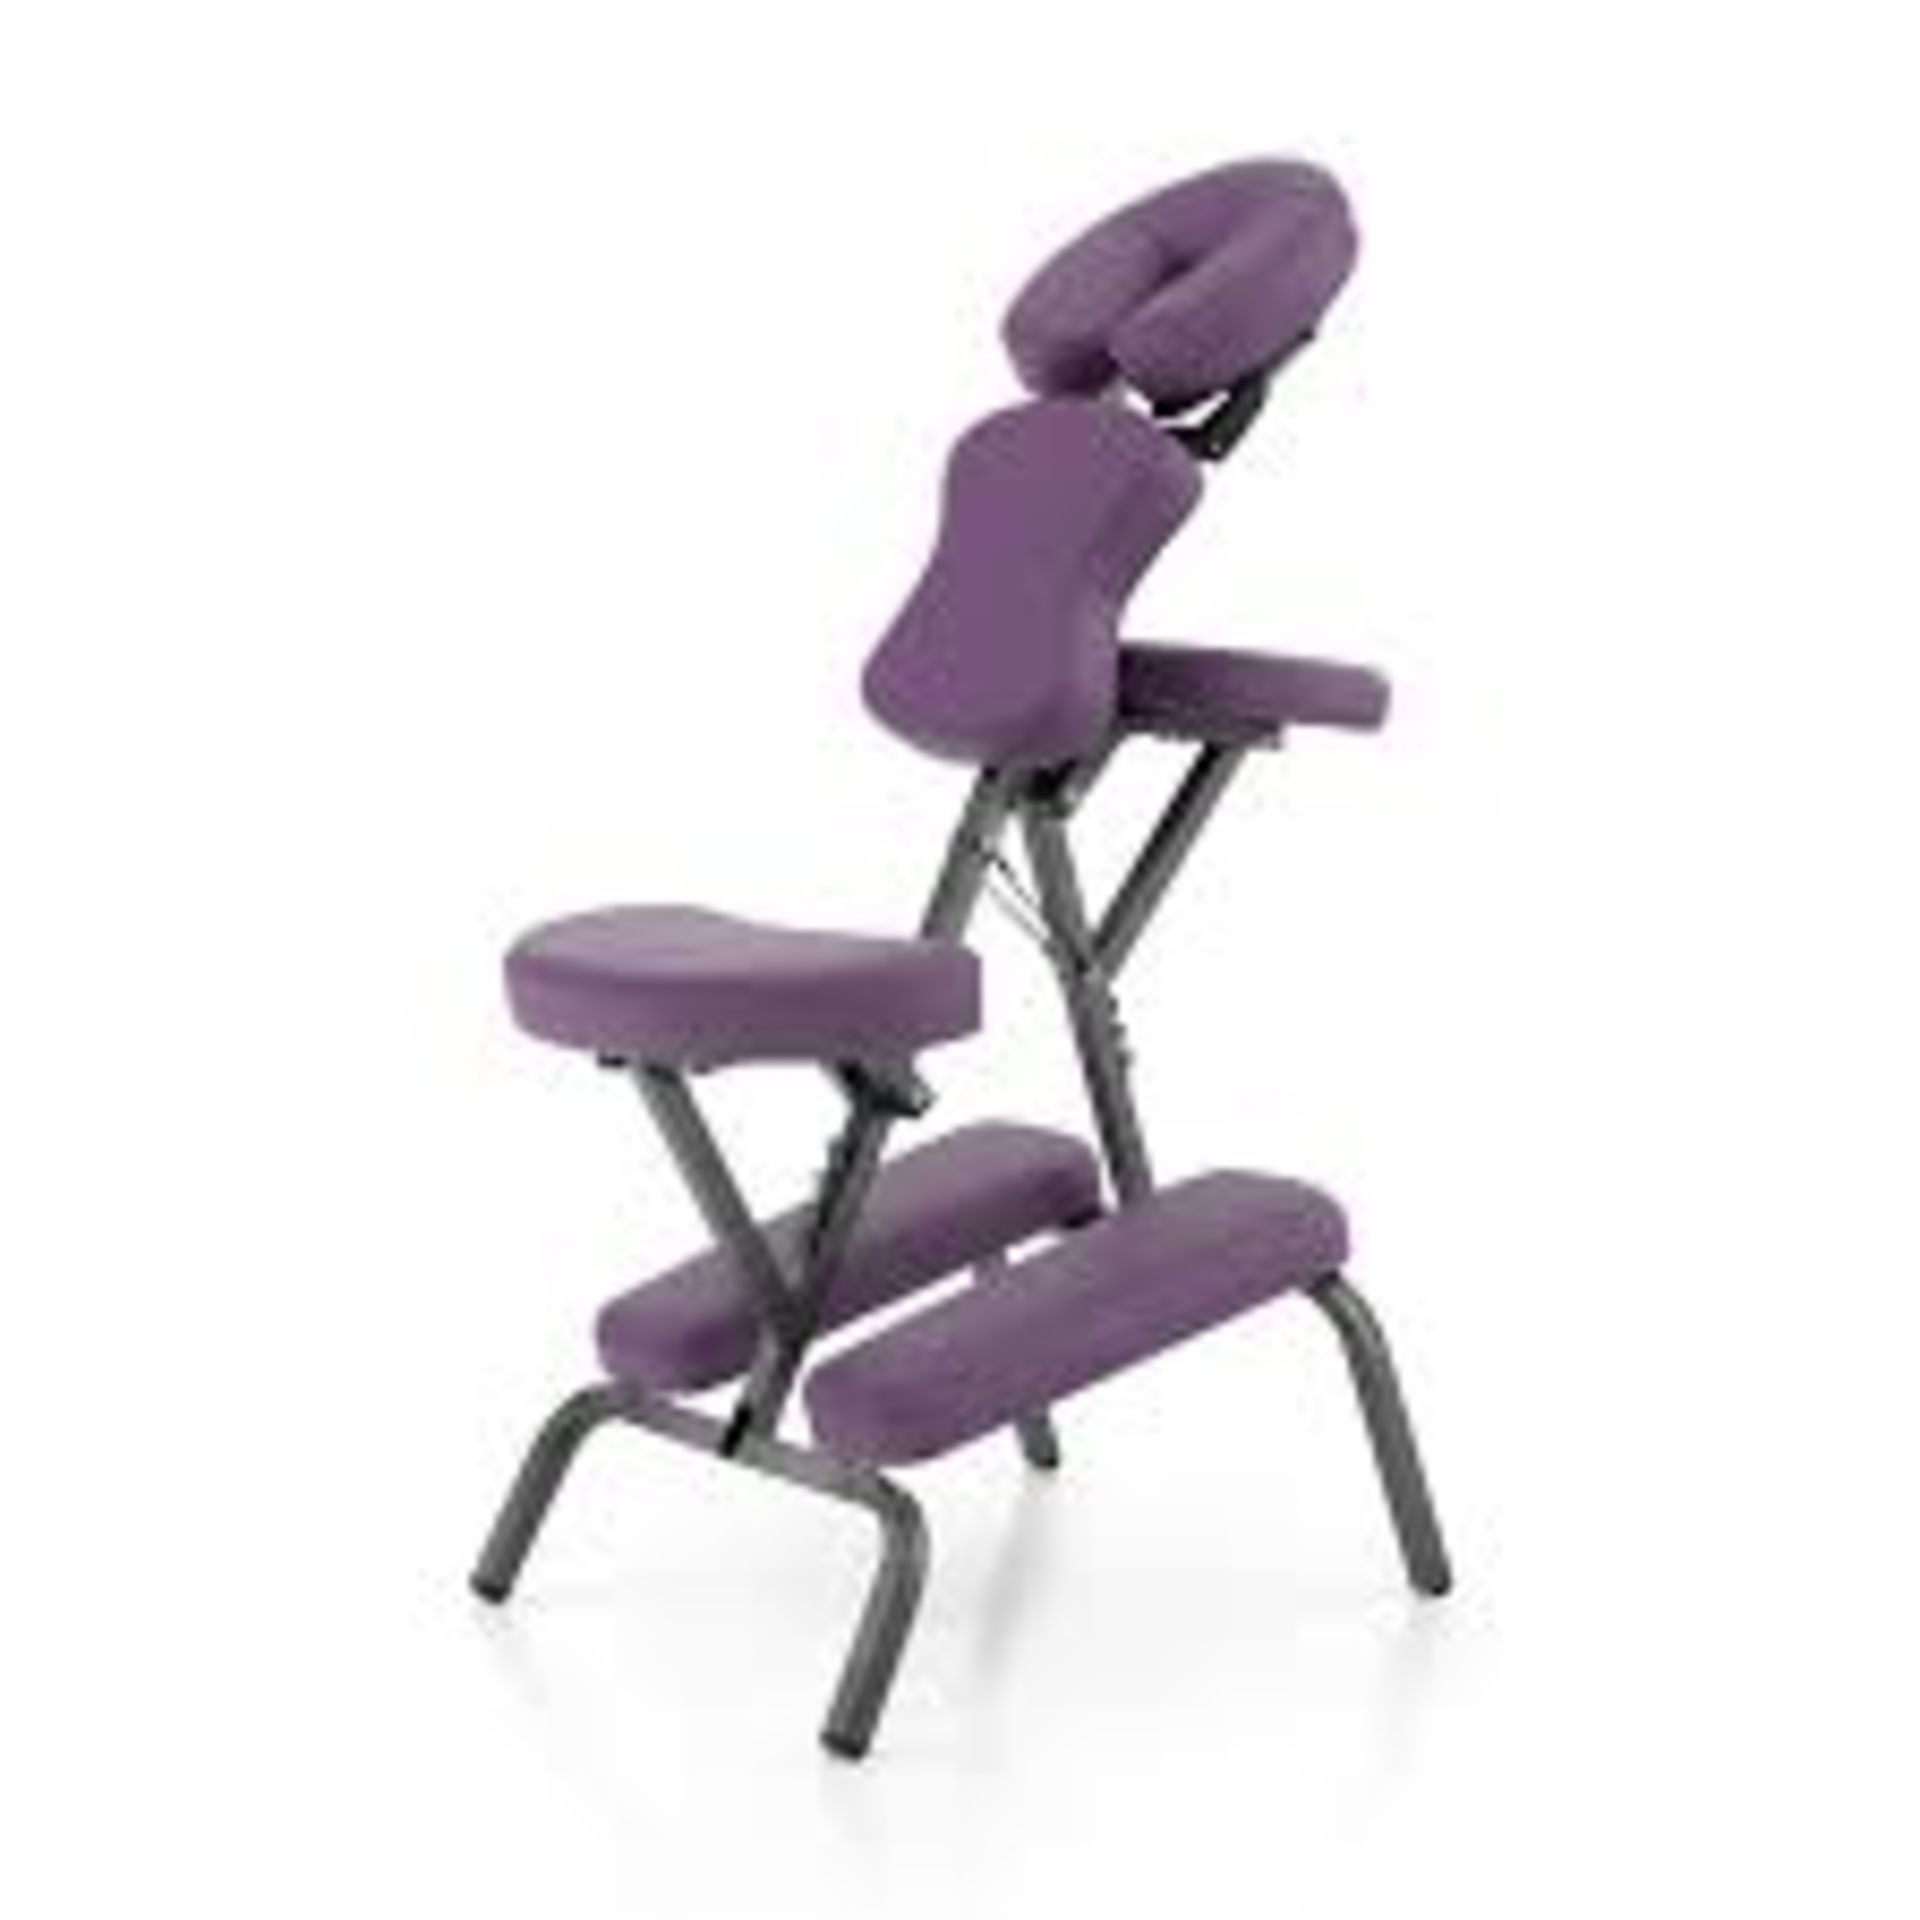 Folding Height Adjustable Massage Chair with Thickened Sponge. - R14.10. The spa chair seat is